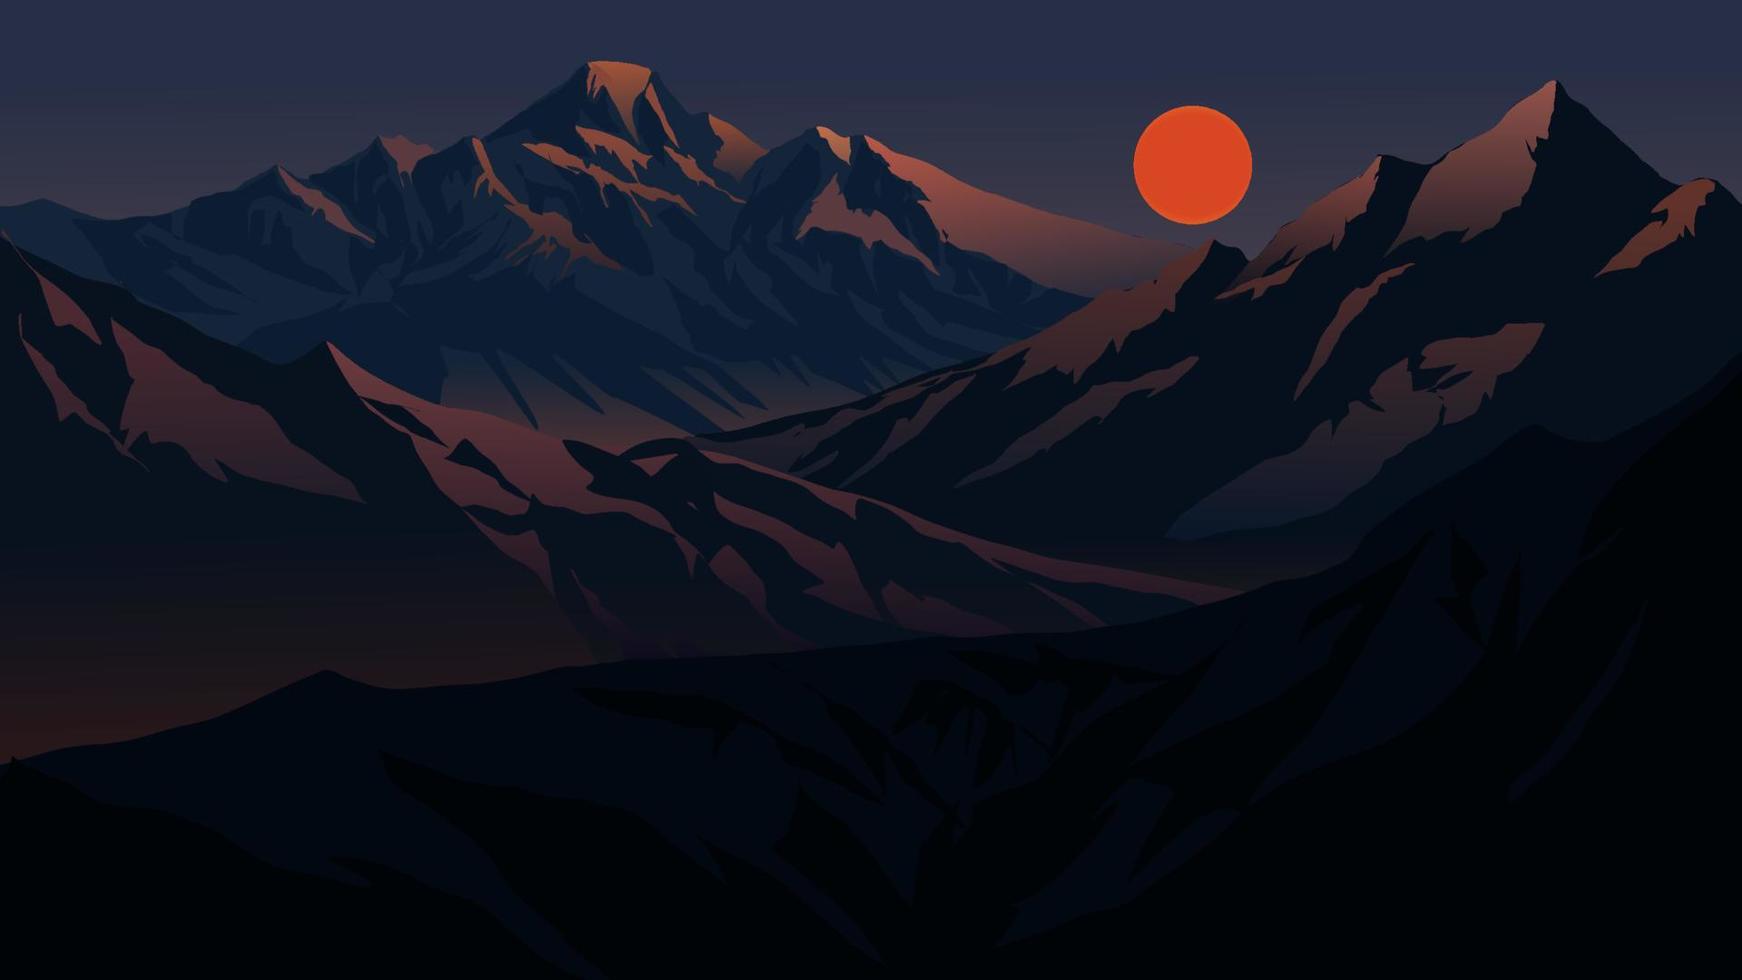 Vector illustration of night landscape over mountain range with full moon